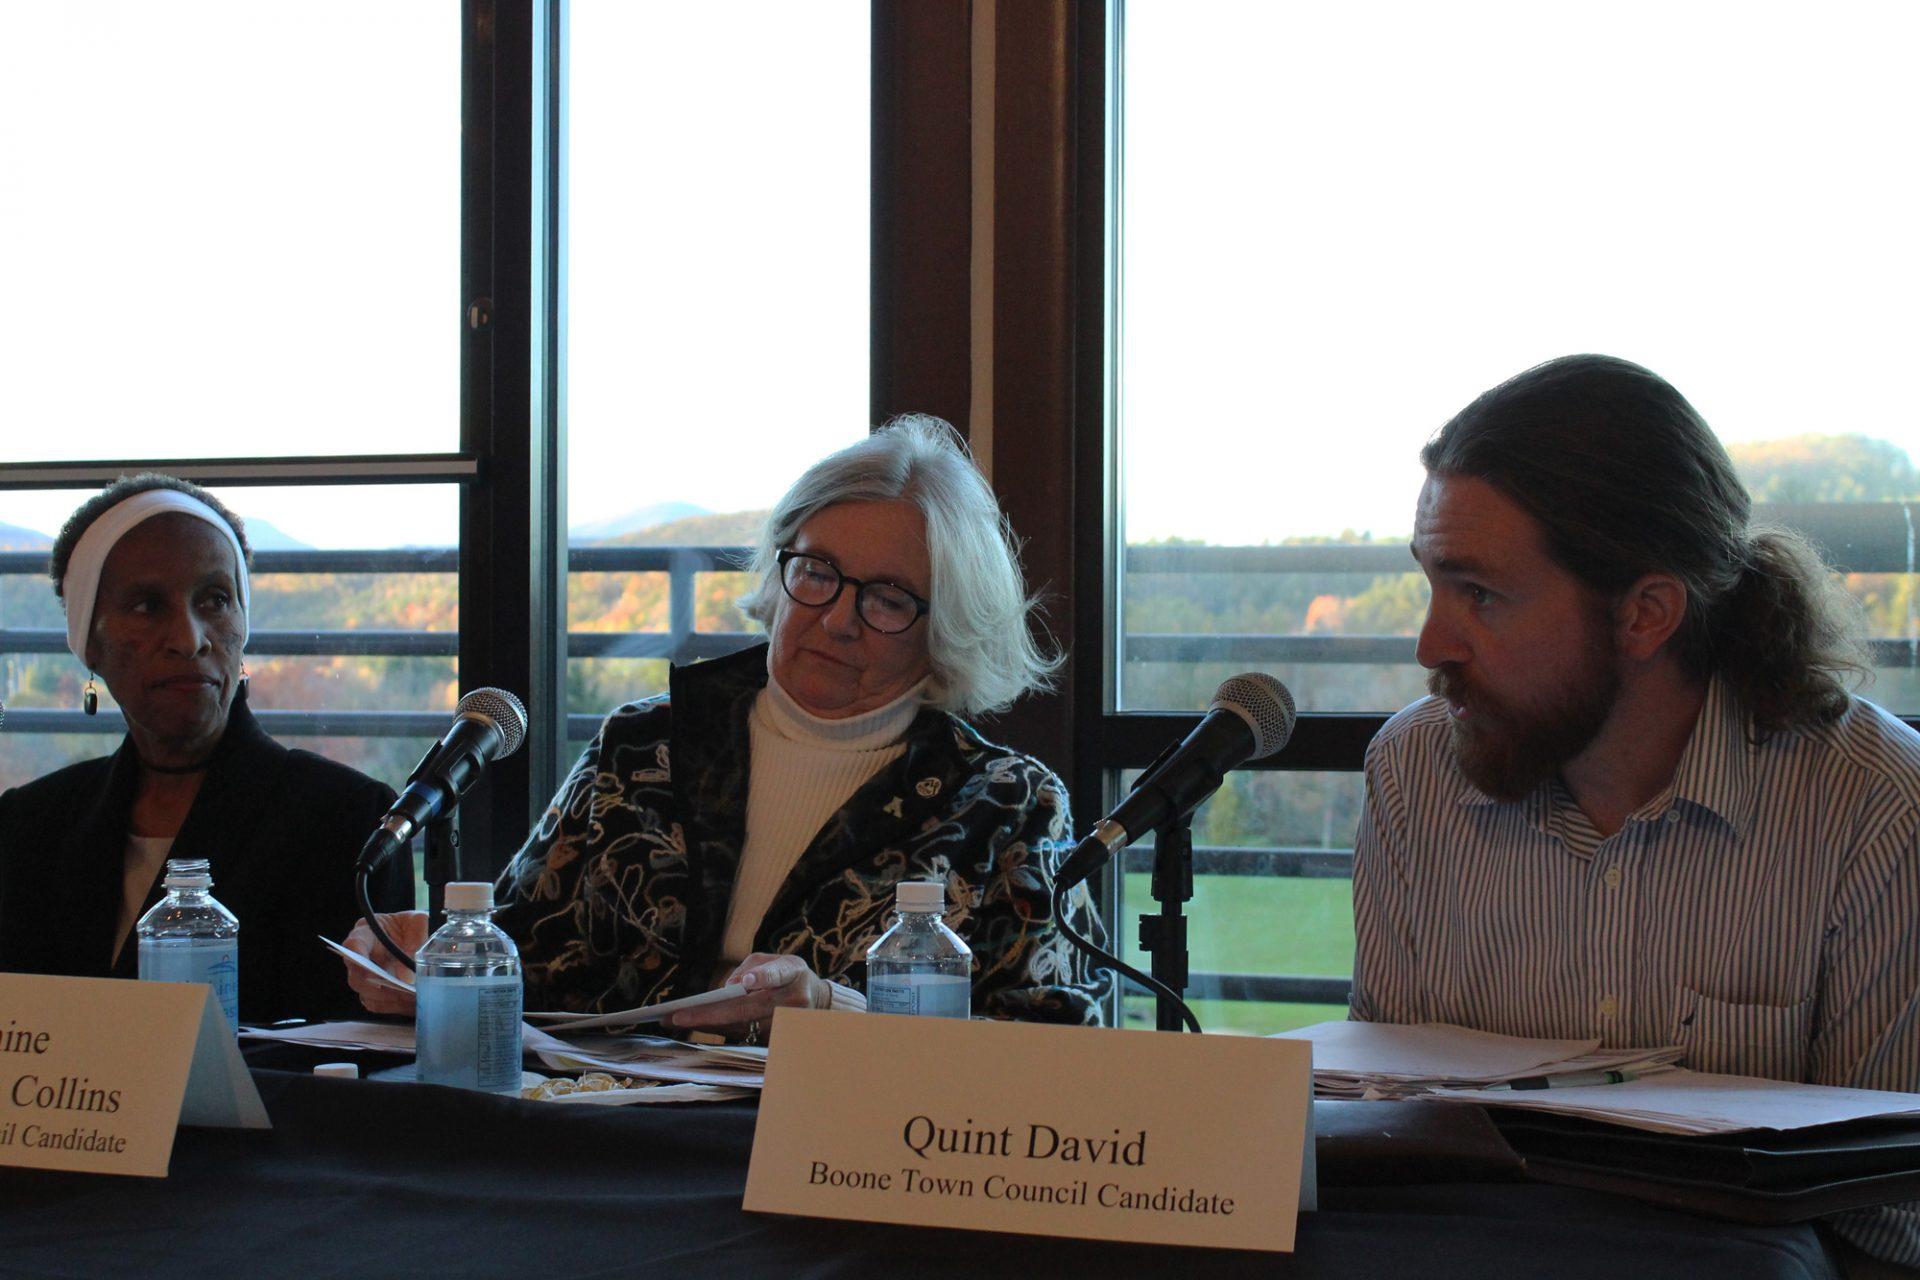 Town council candidates Connie Ulmer, Jeanninie Underdown Collins, and Quint David at Tuesday nights meet and greet at Boone Golf Club. Five candidates participated in the meet and greet to answer questions and get to know voters.